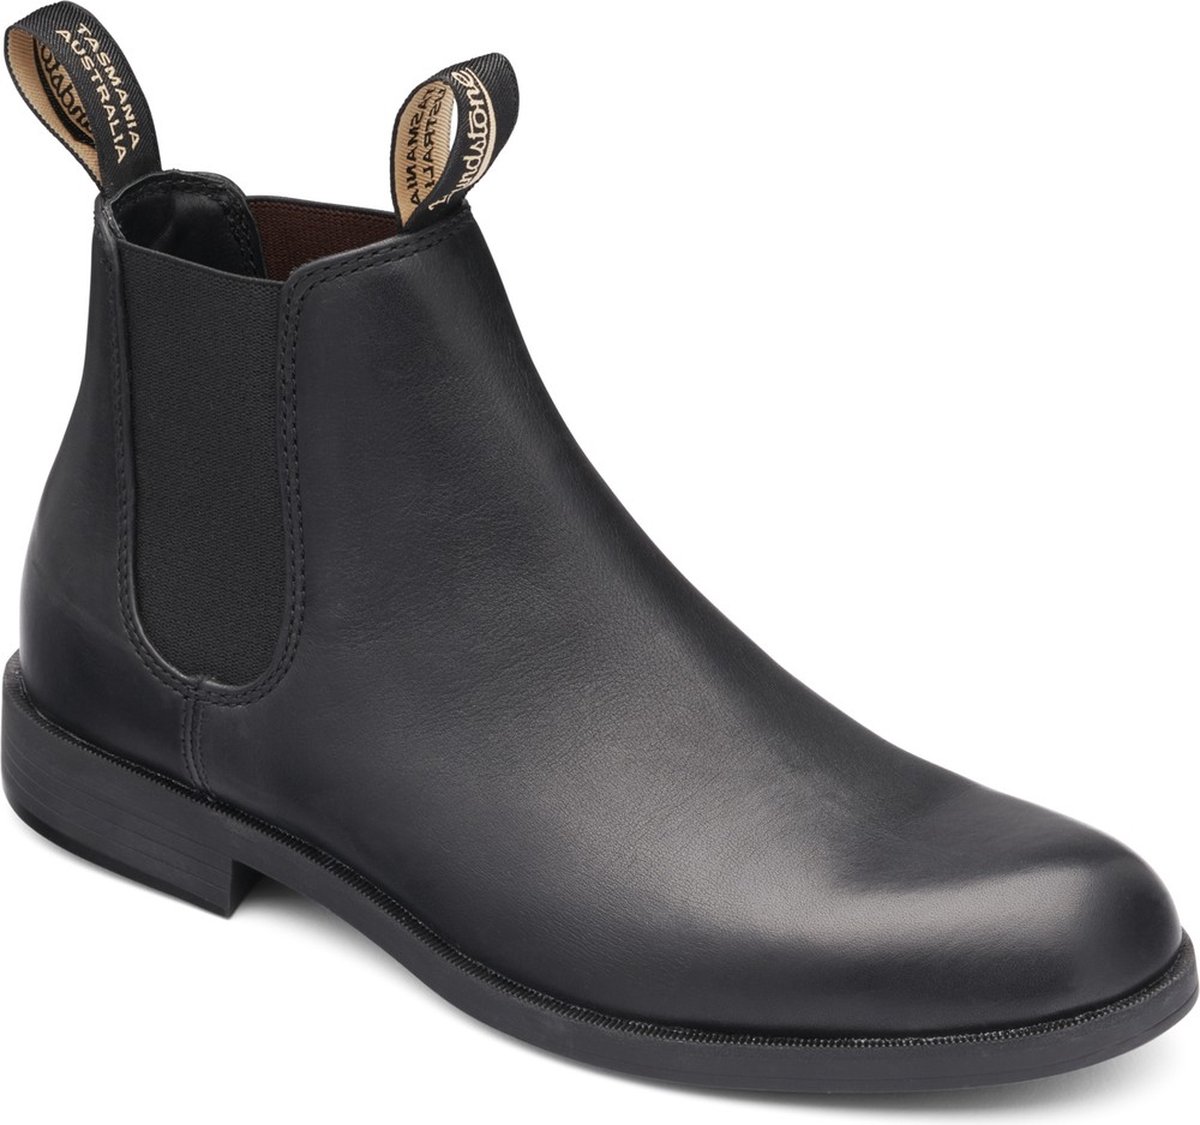 Blundstone Stiefel Boots #1901 Leather (Dress Series) Black-8.5UK